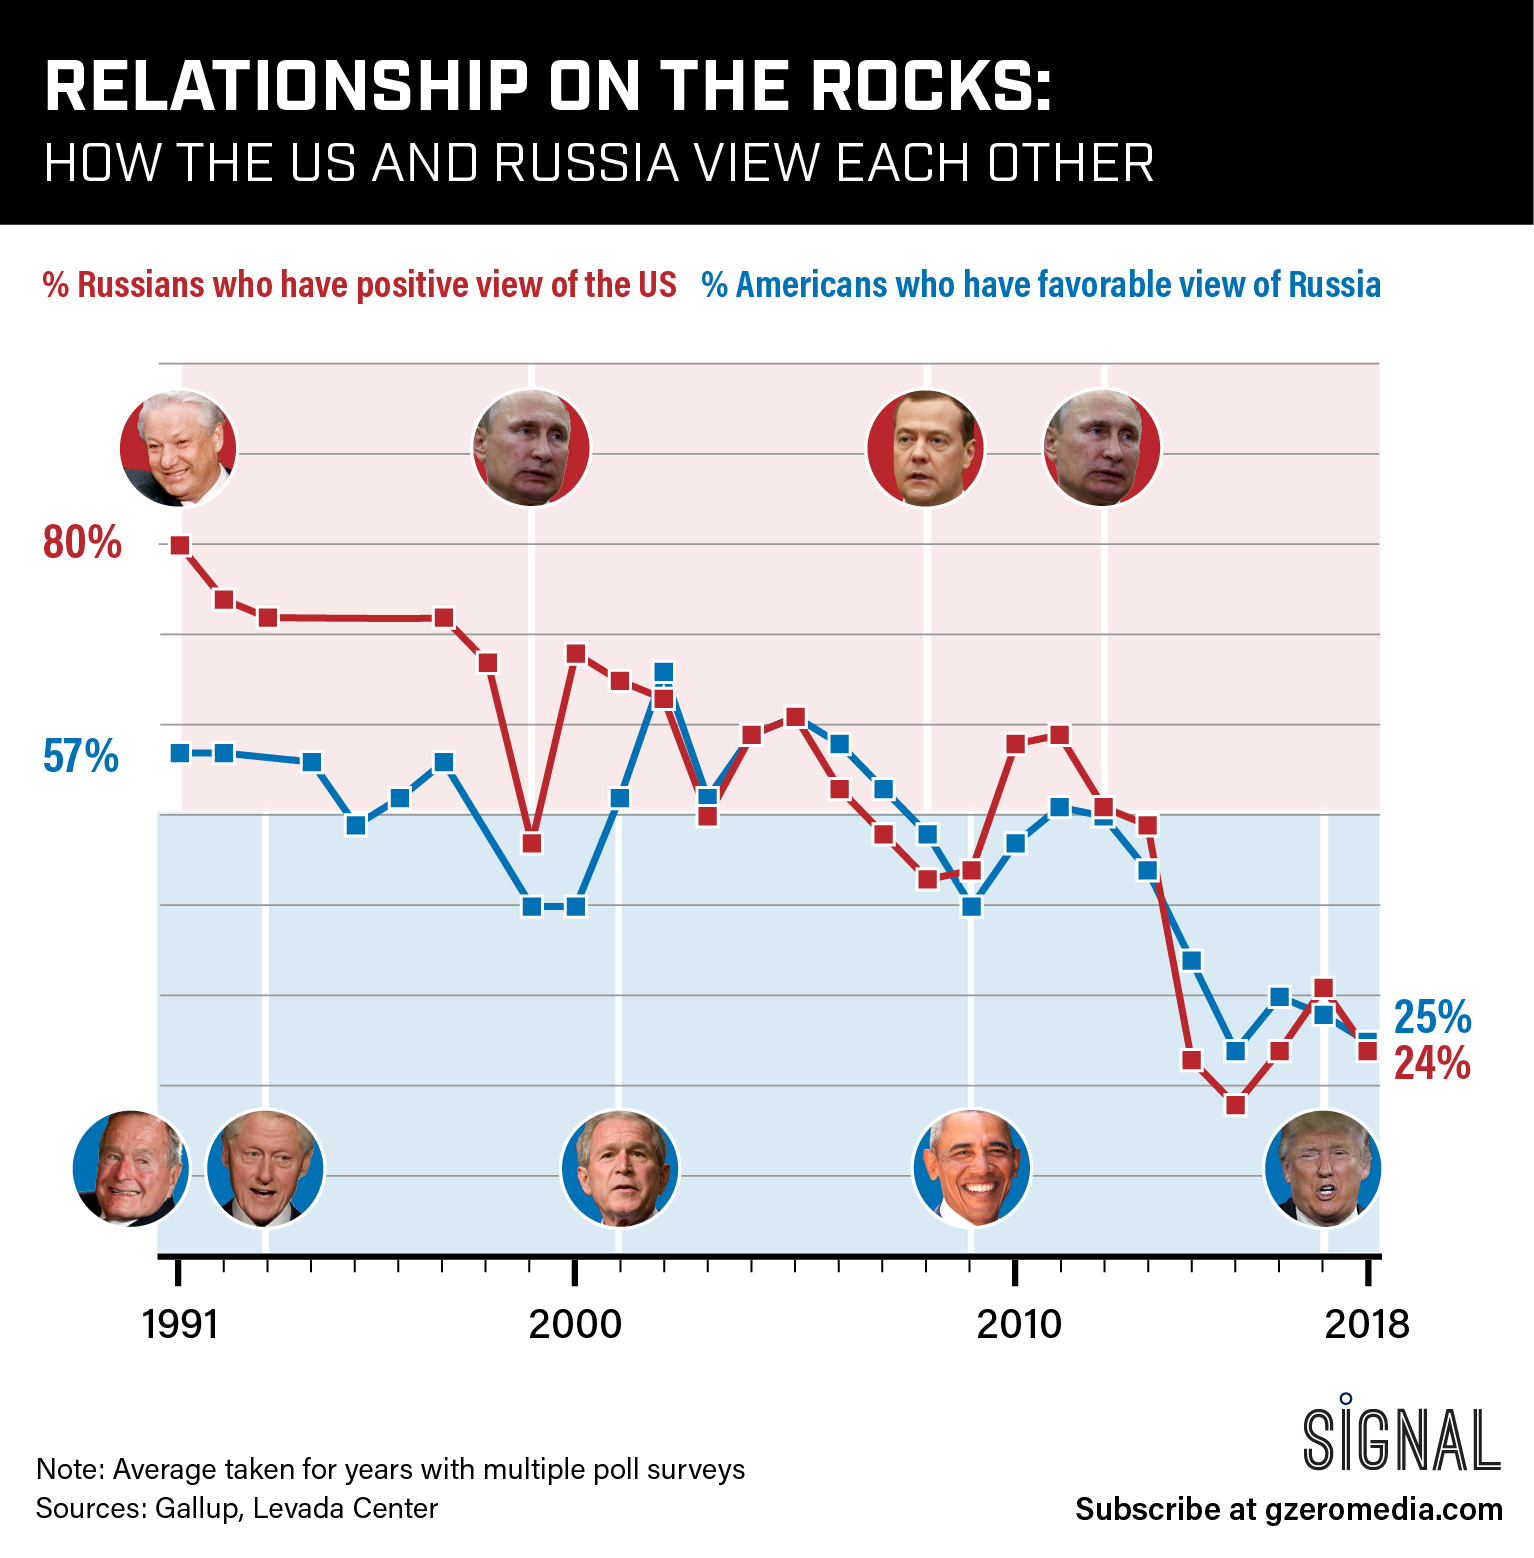 GRAPHIC TRUTH: RELATIONSHIP ON THE ROCKS